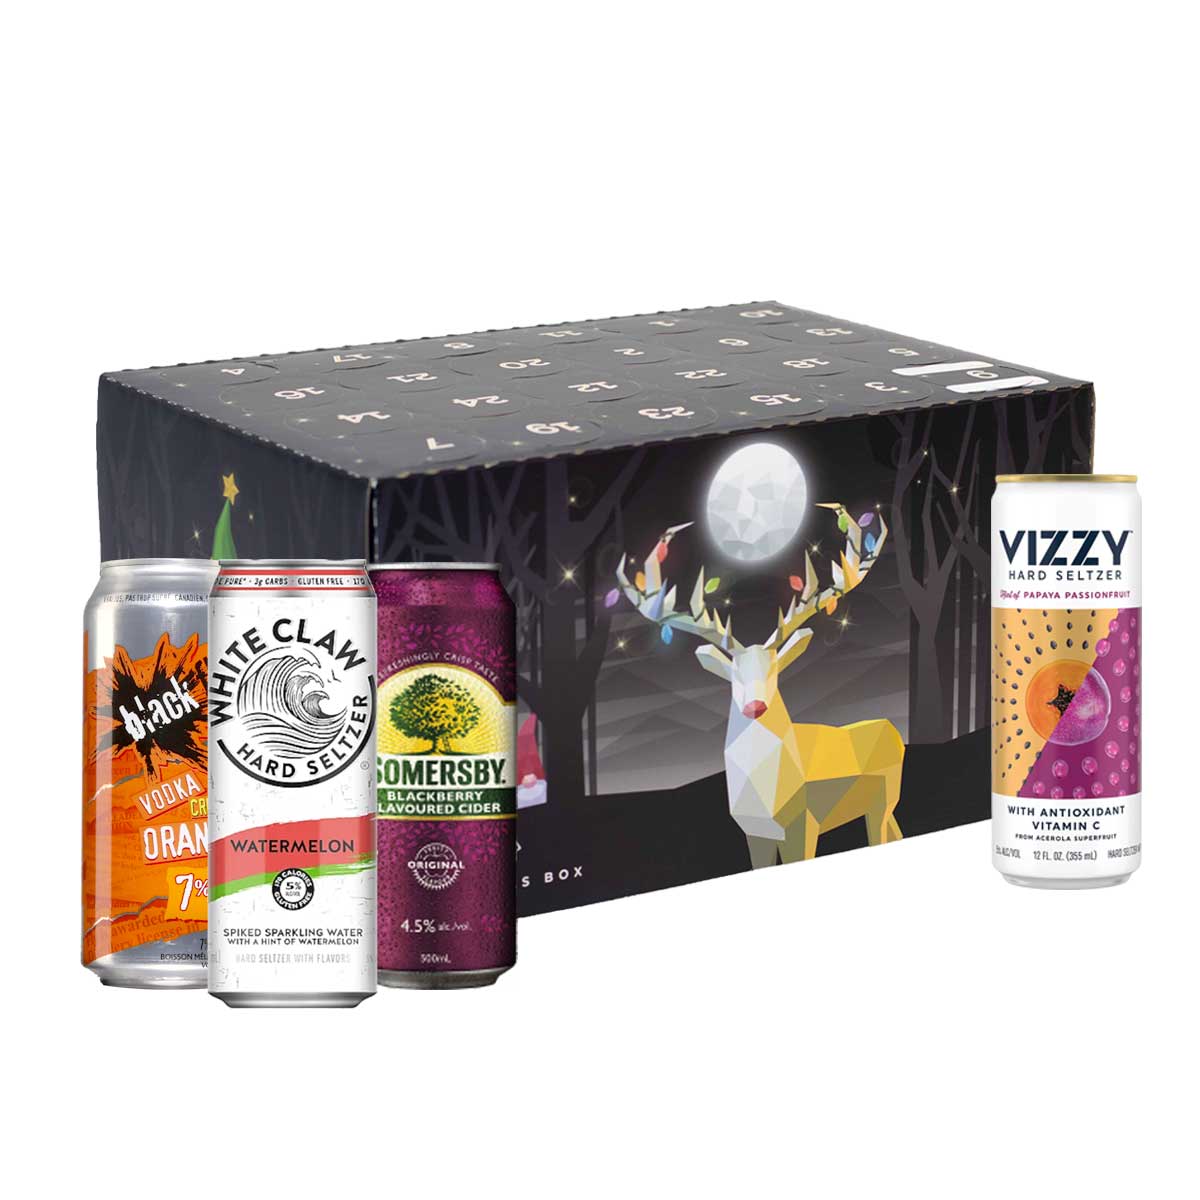 TAG Liquor Stores BC - Ready to Drink Advent Calendar 24 x Assorted 473ml Tall Cans